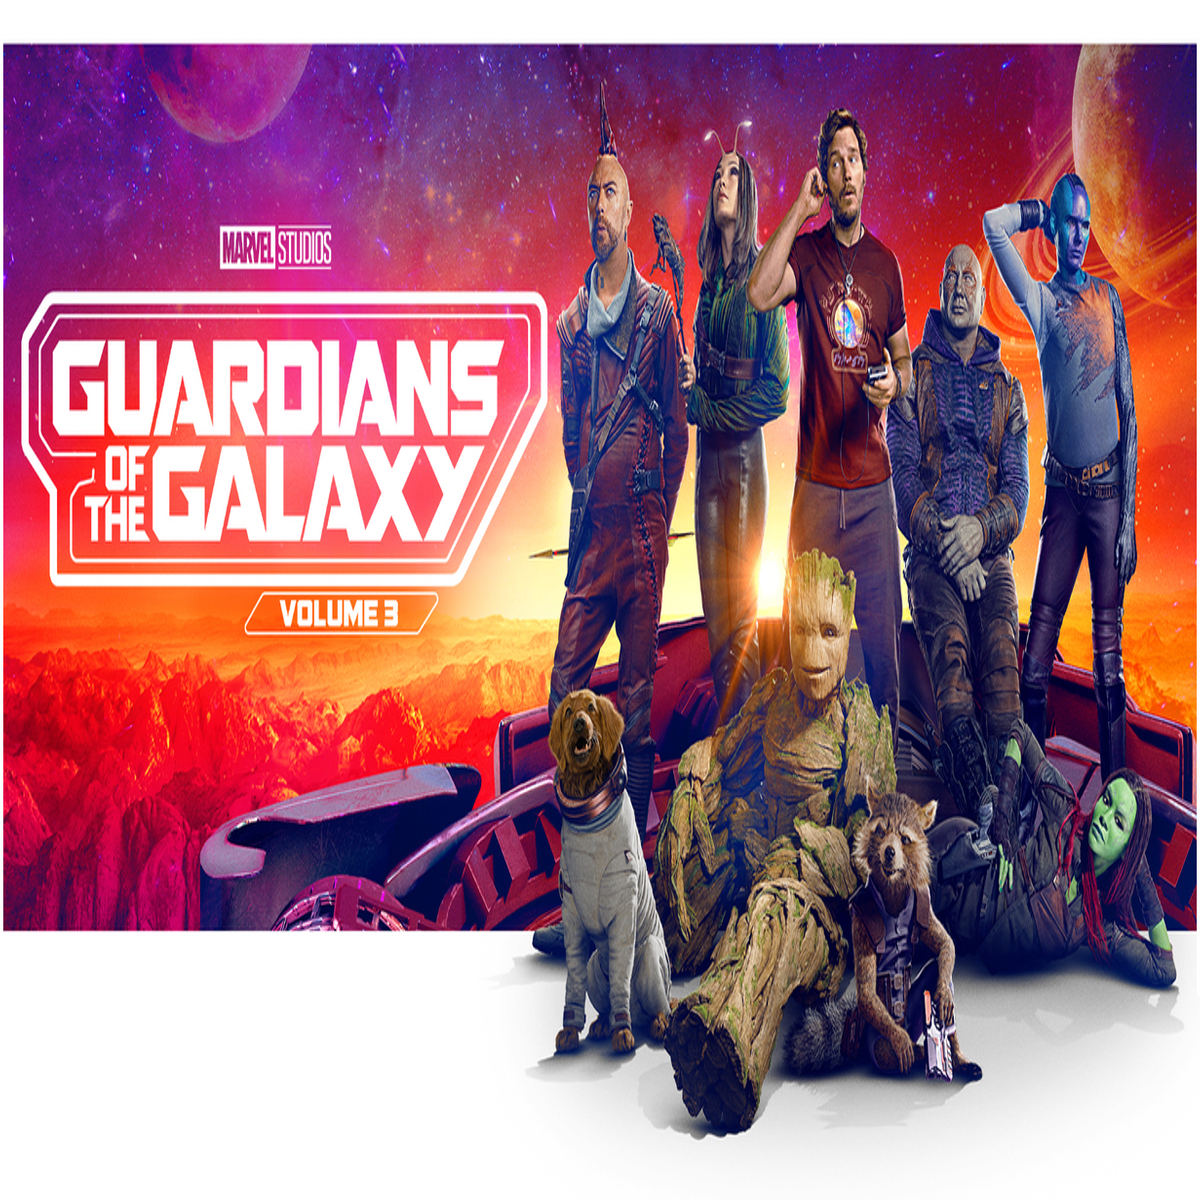 When Will Guardians of the Galaxy Vol. 3 Be Available to Stream?